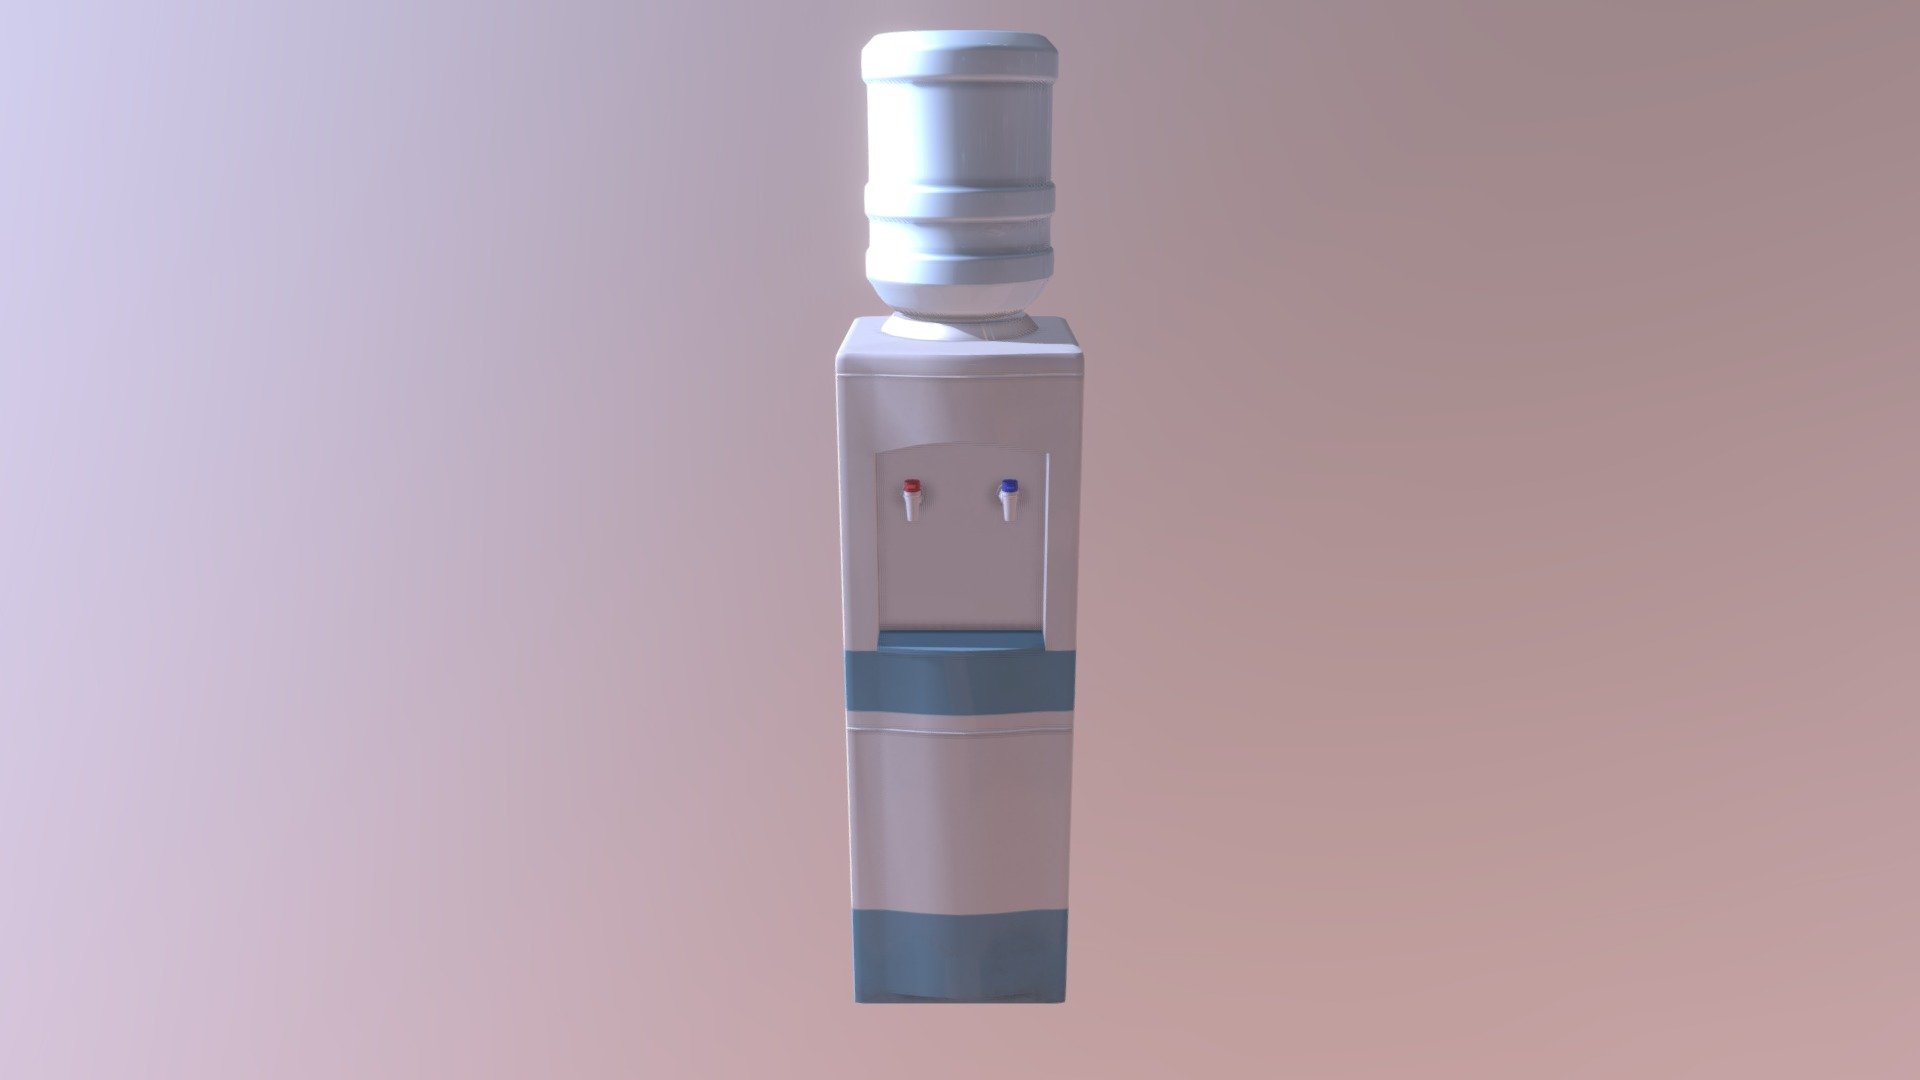 Water Cooler 3D model.

Poly: 1311
Vertex: 1288
in subdivision level 0

2480x2480 JPGTexture
Include Diffuse and Normal

Lowpoly:Yes
Textures :Yes
Materials : Yes
Animated : No
Rig : No
UV: Yes
Unwrapped UVs : Yes,Non-overlapping
Geometry : Polygon Mesh/Polygonal
Poly: 1311
Vertex: 1288

Description For Sketchfab - Water Cooler 01 - 3D model by MadAssets 3d model